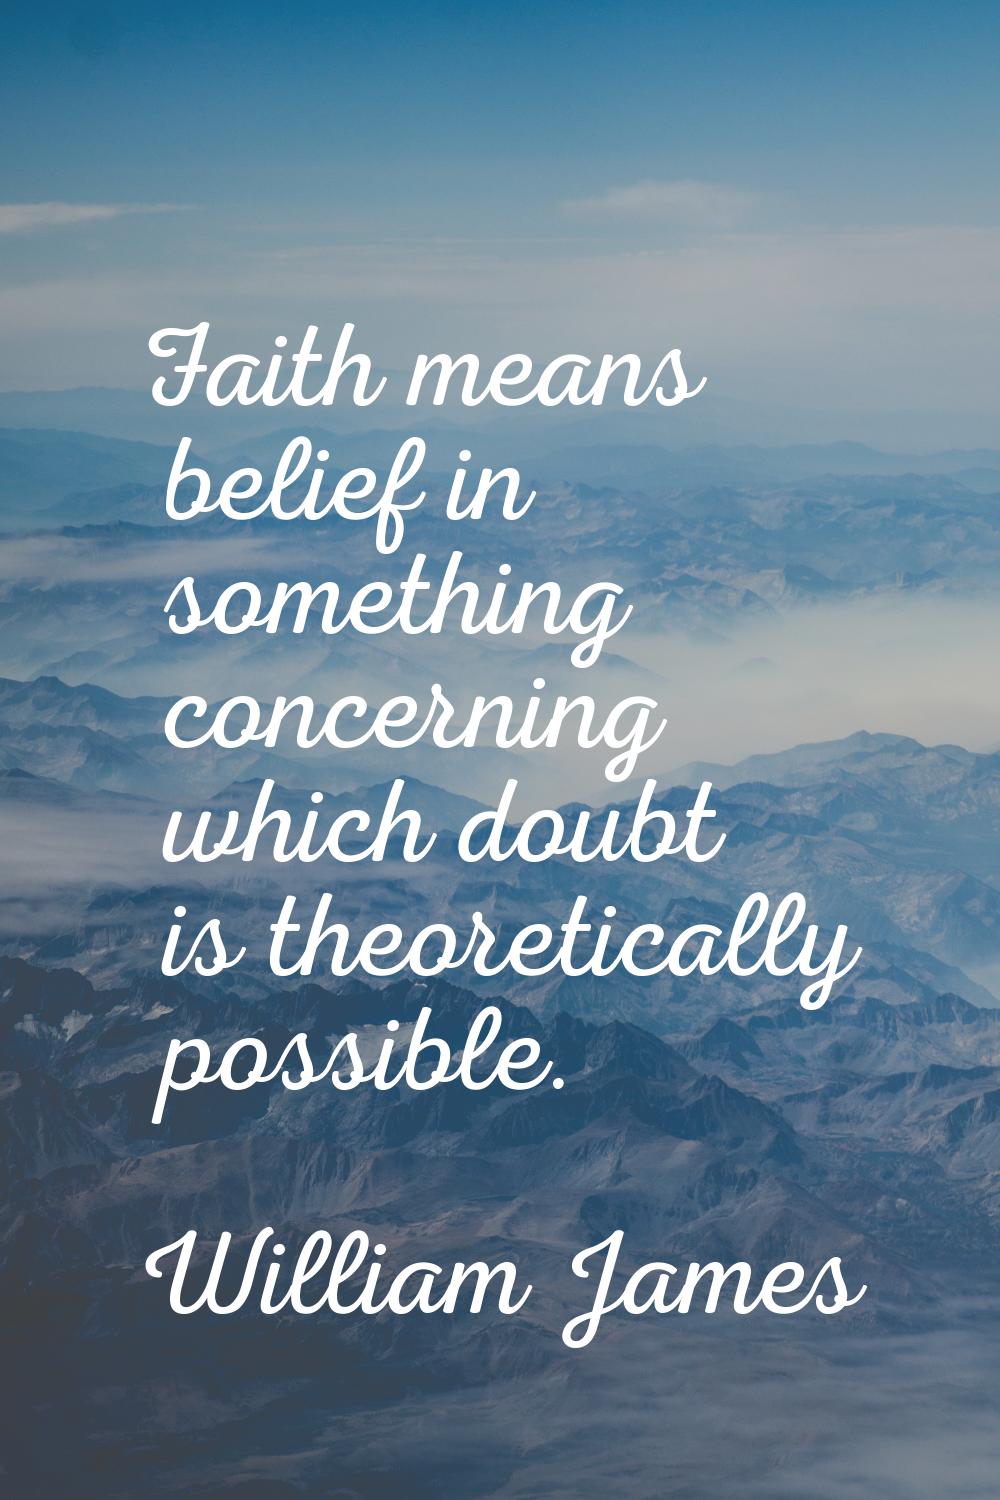 Faith means belief in something concerning which doubt is theoretically possible.